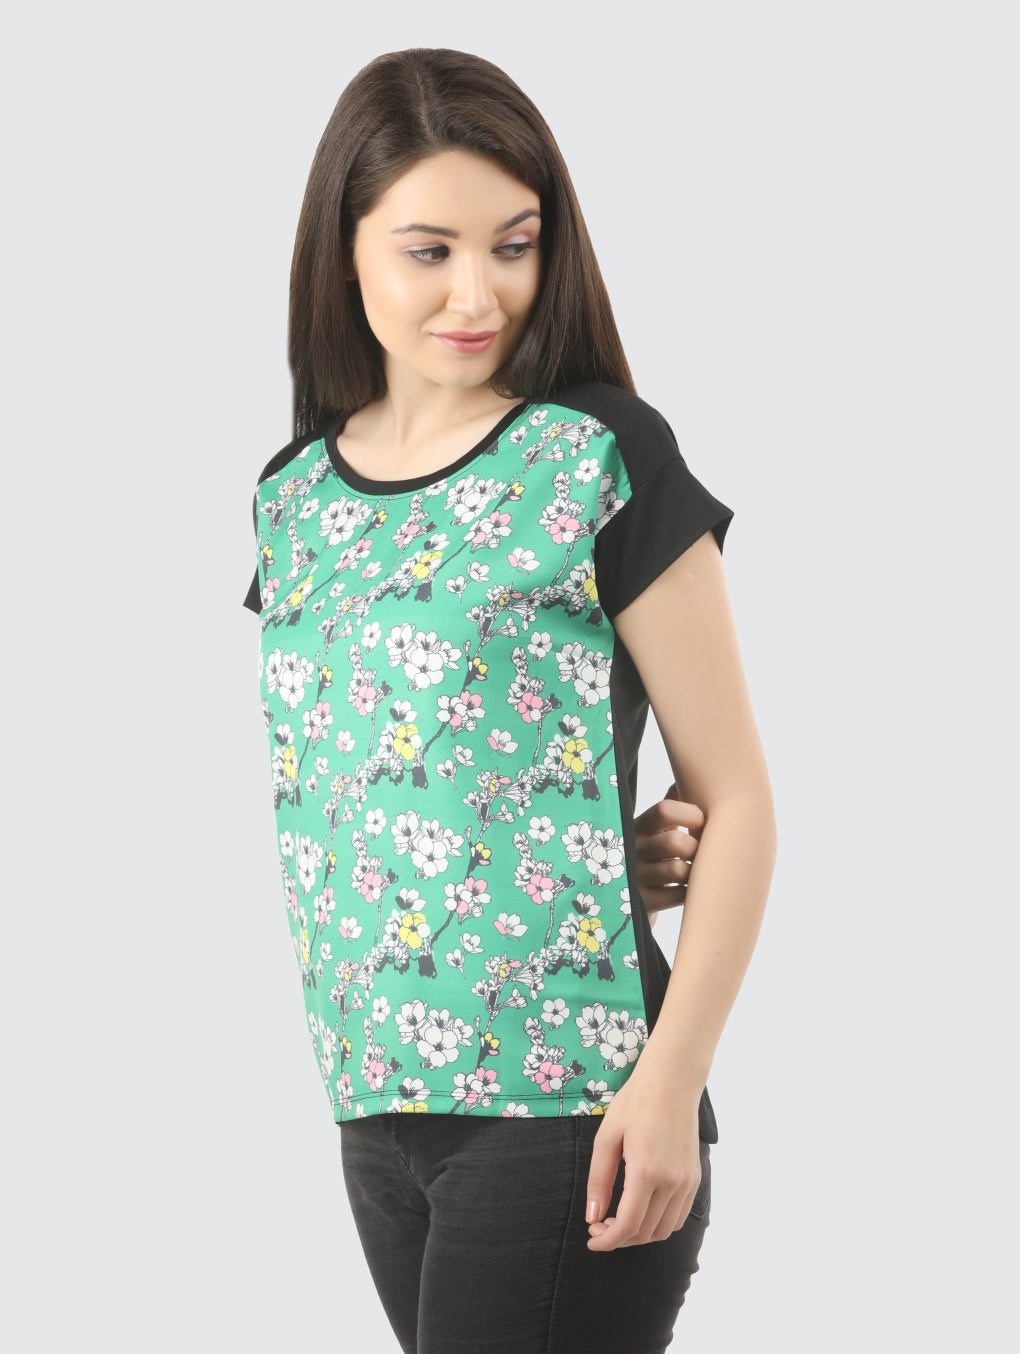 BERRY02 (100% POLYESTER CASUAL TOPS FOR WOMENS)